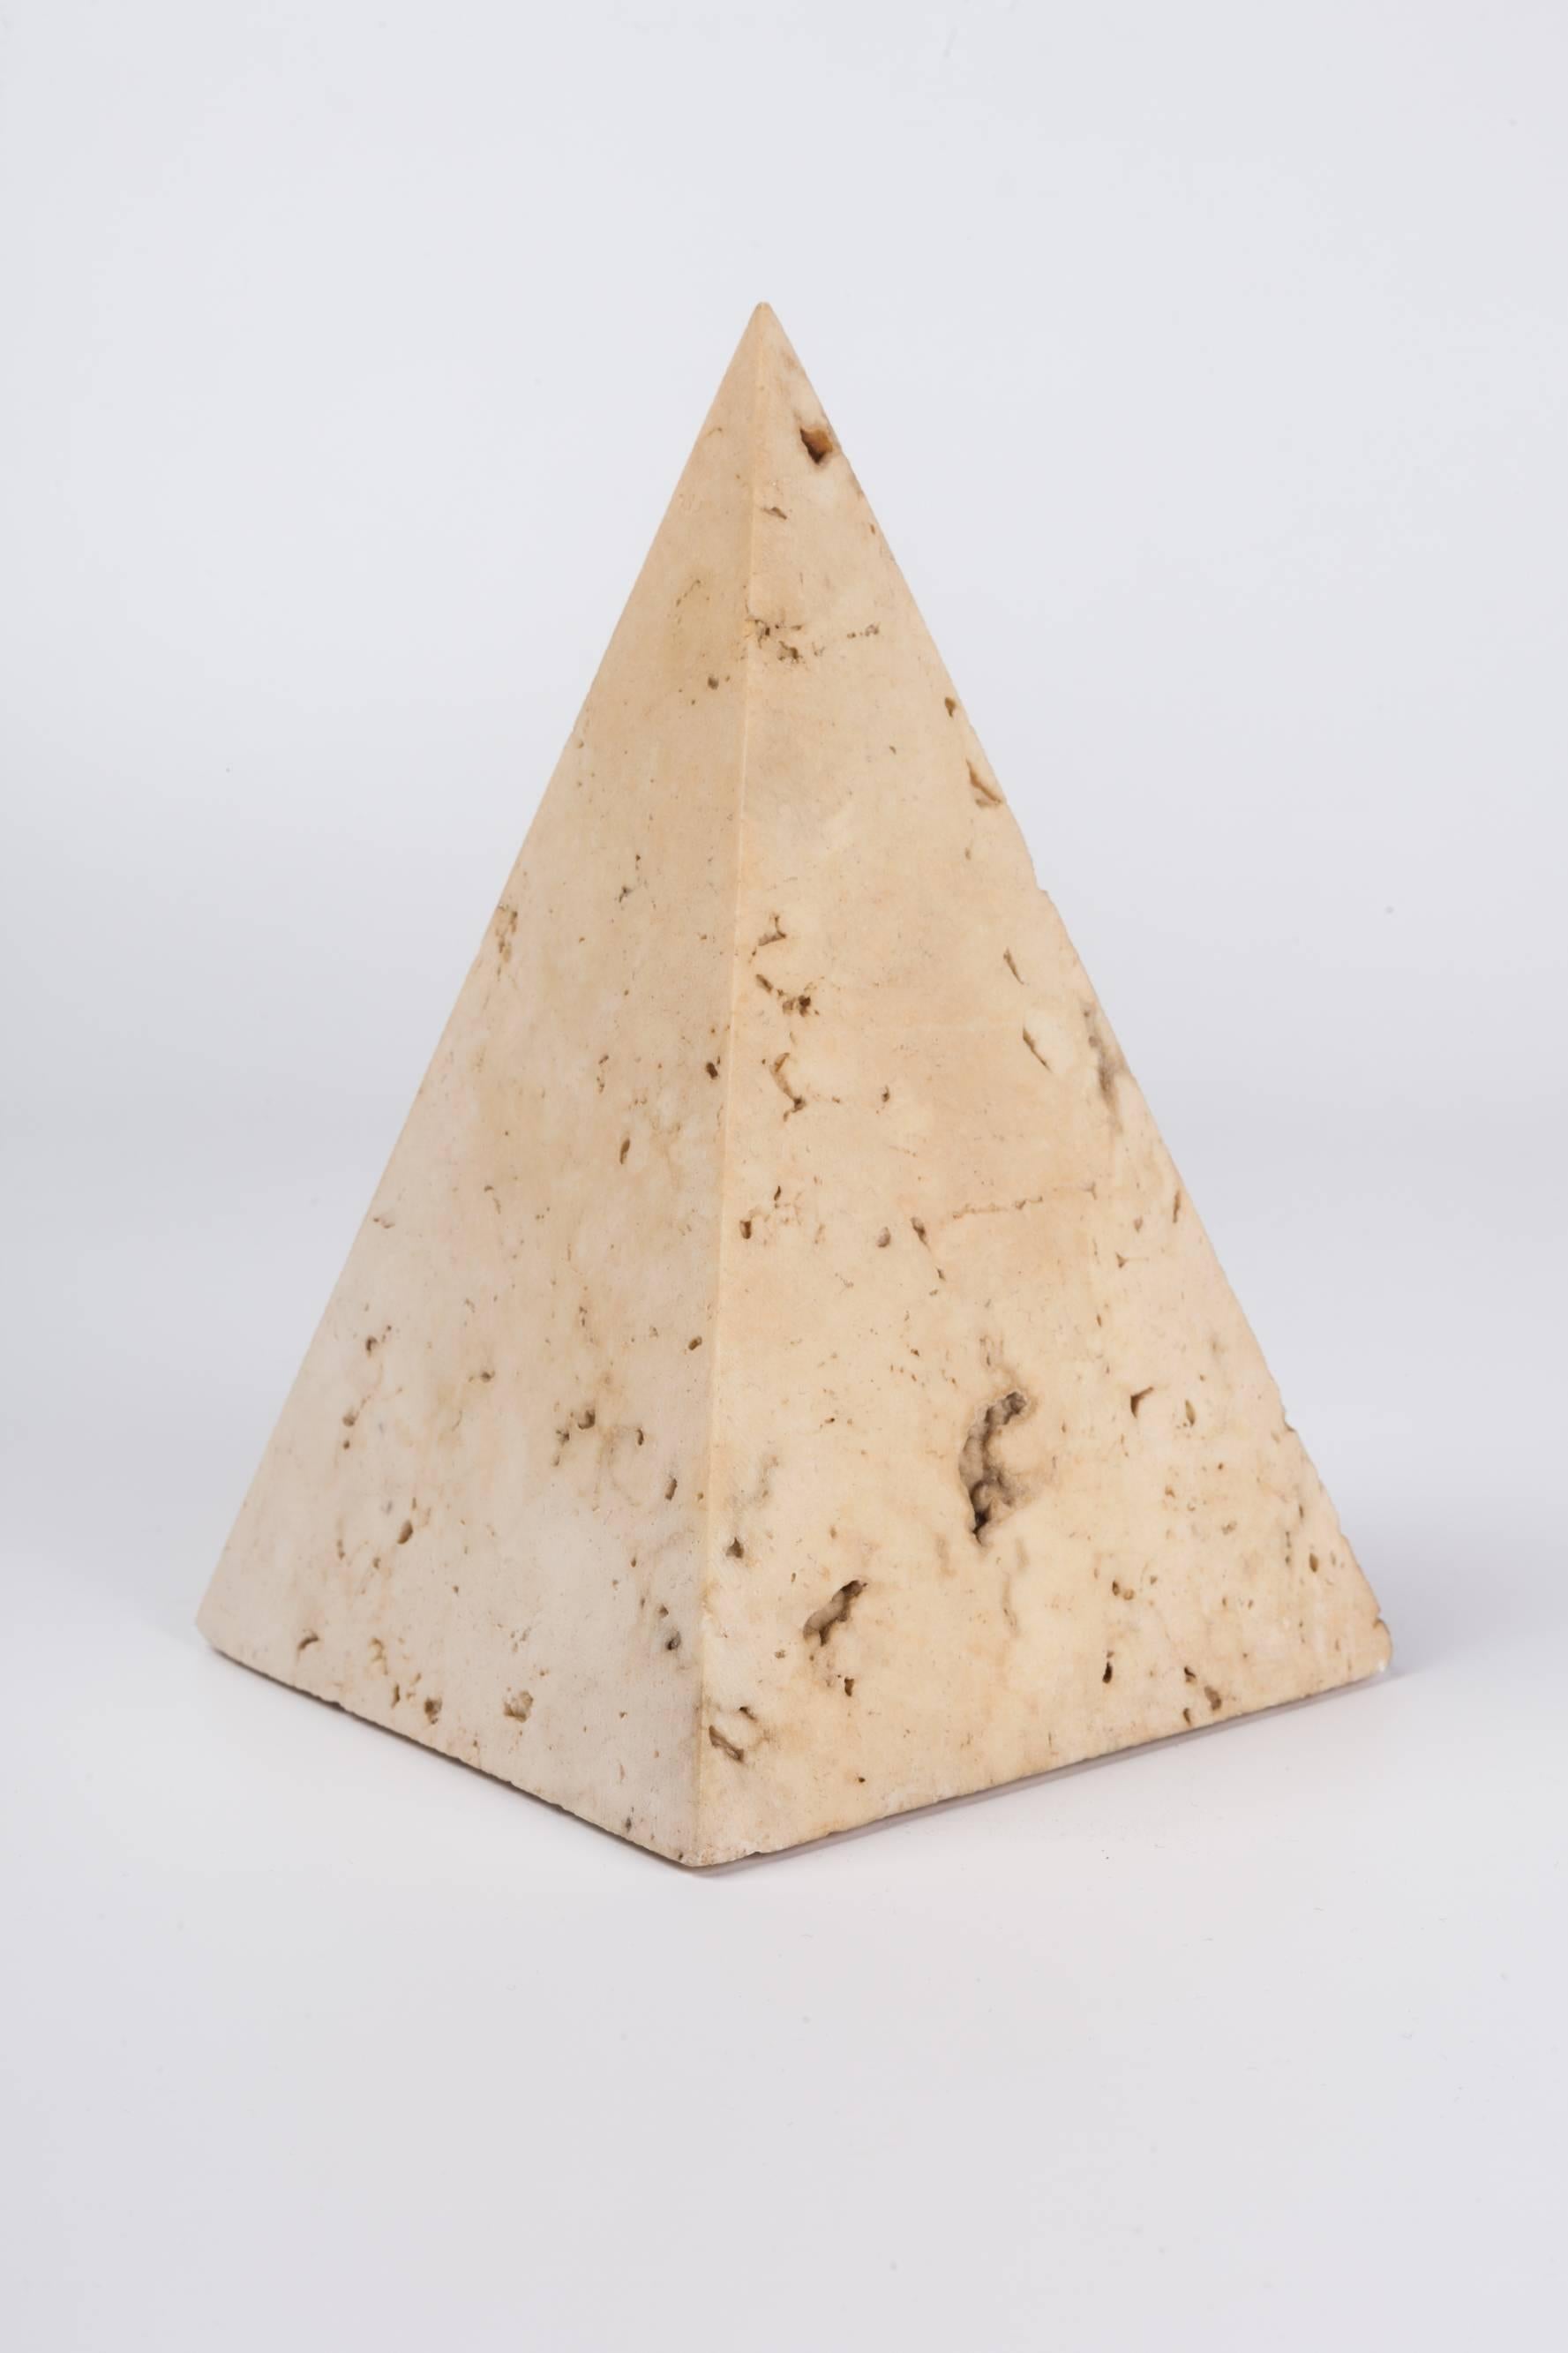 Pyramid paperweight or decorative object made of neutral cream travertine marble. Made in Italy in the 1970s.